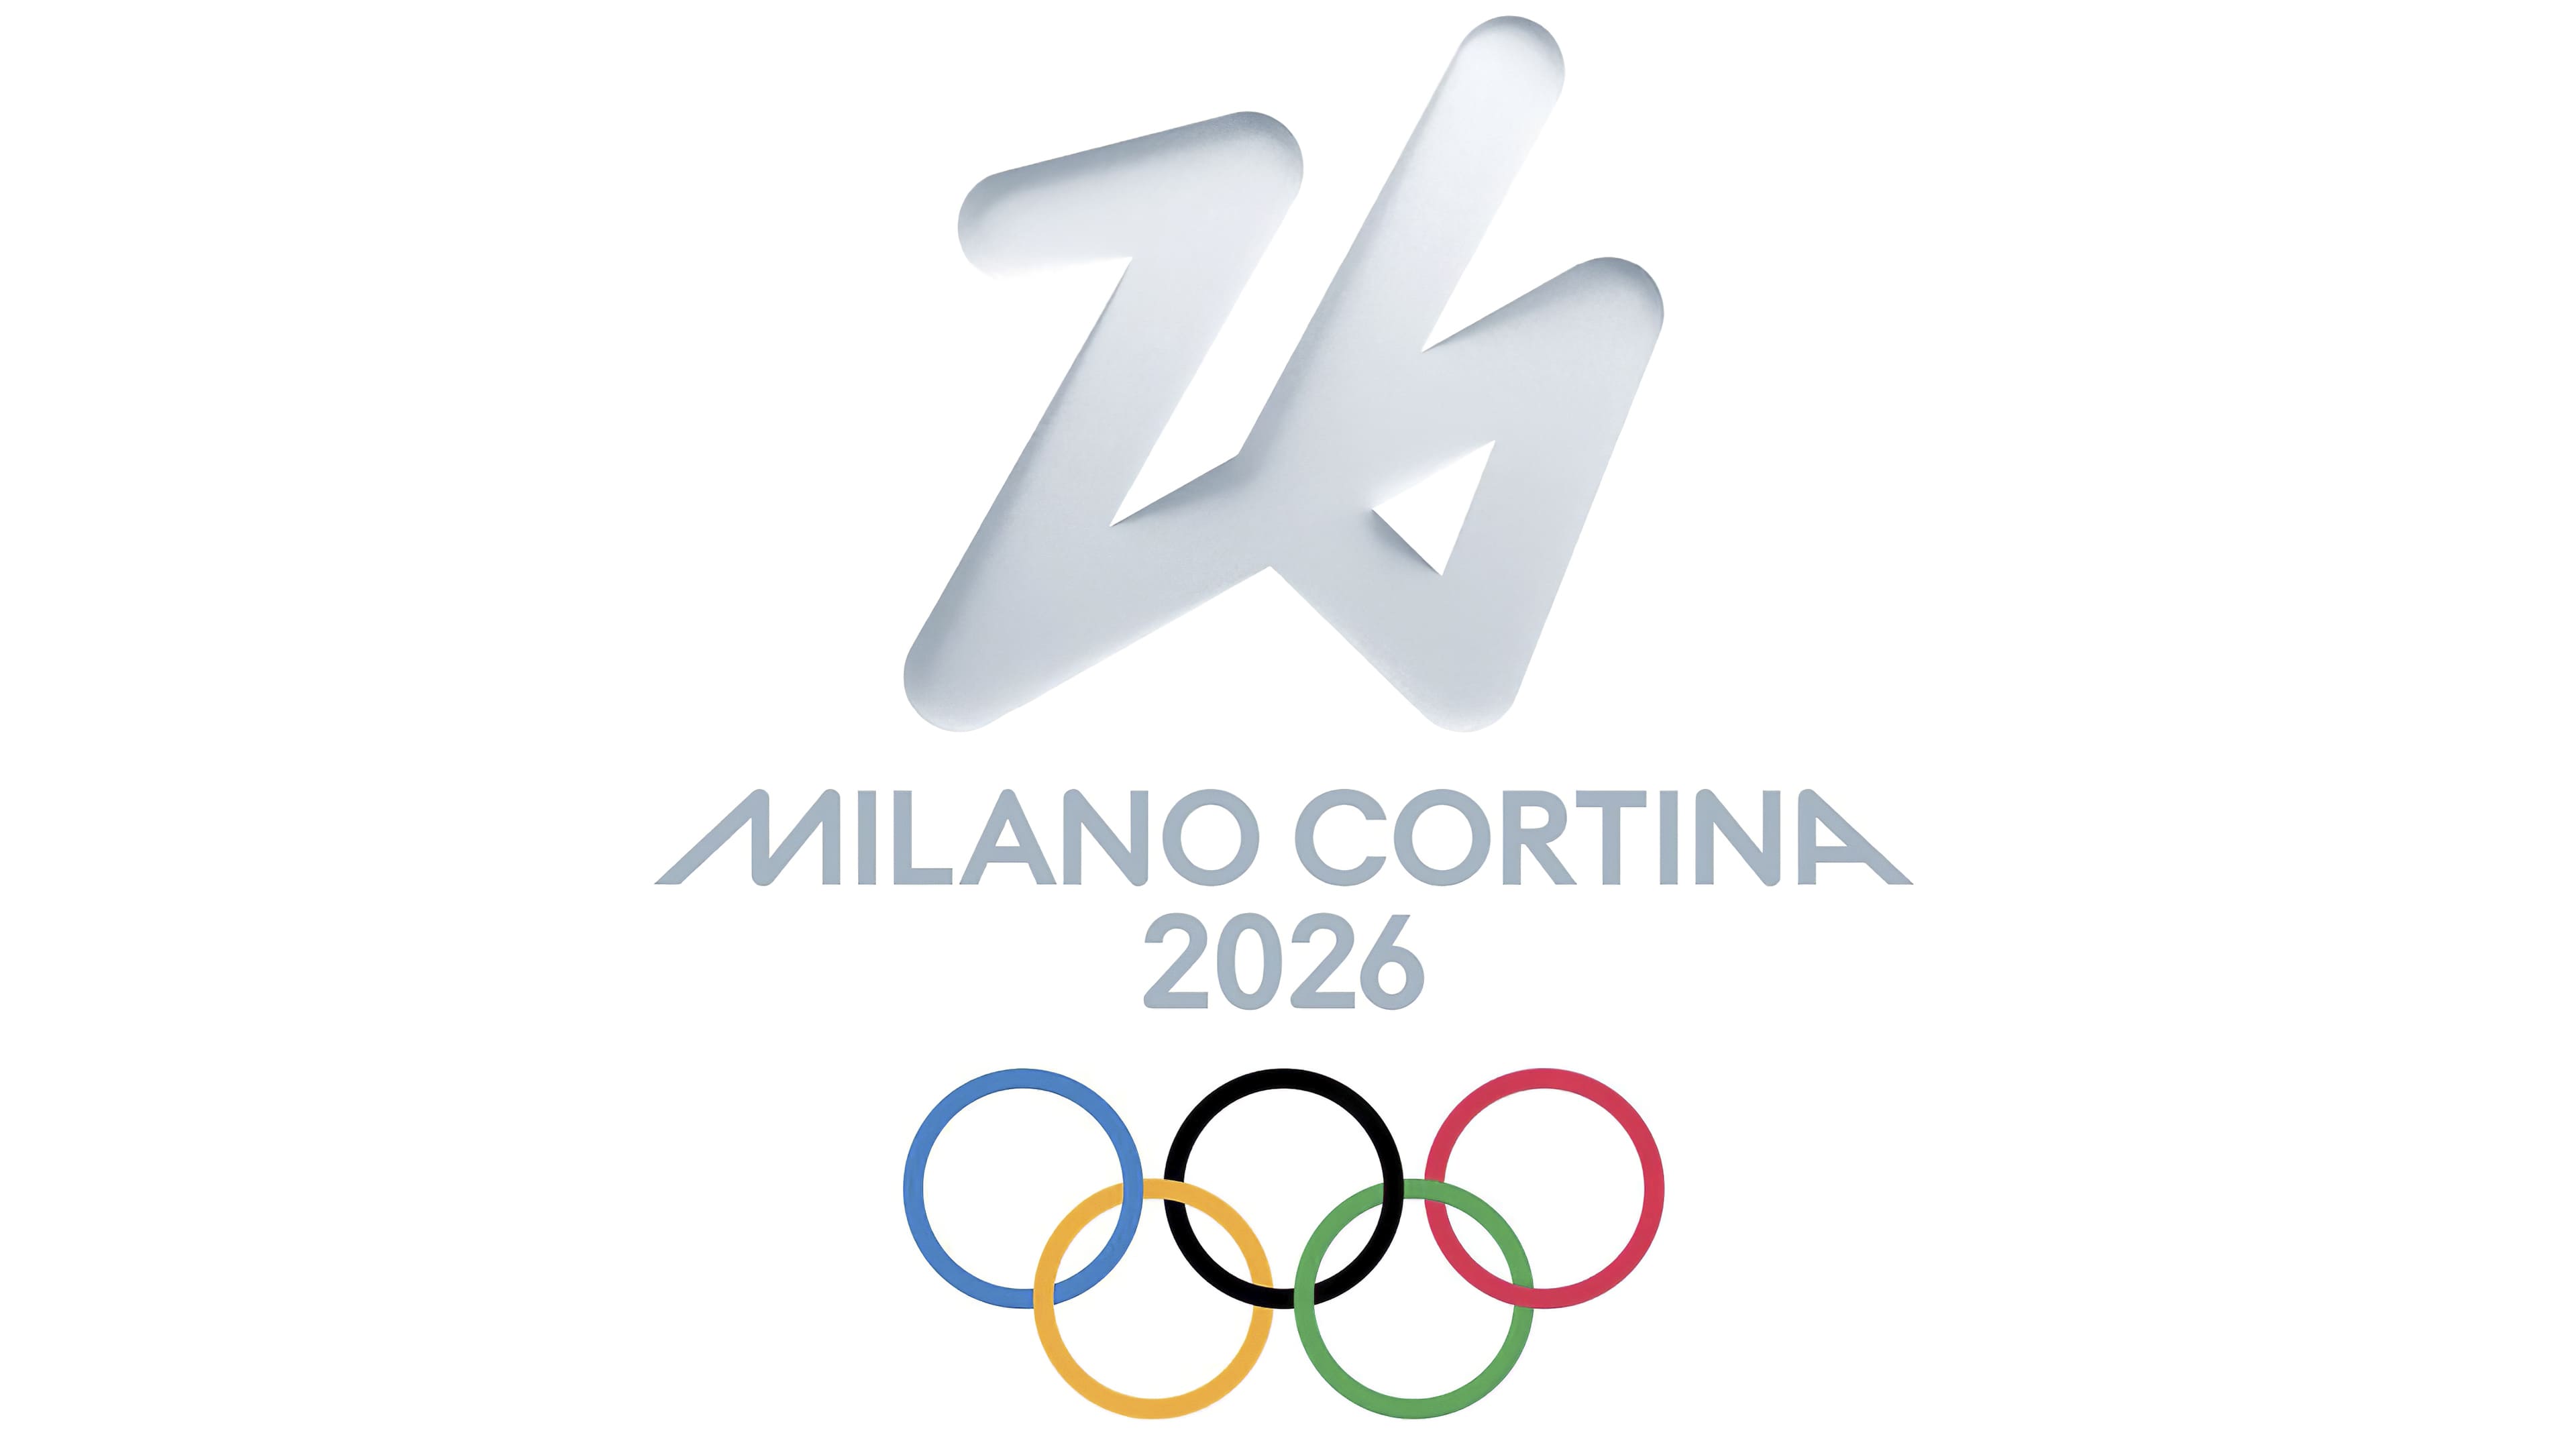 Winter Olympics 2026 the logo of the people chosen